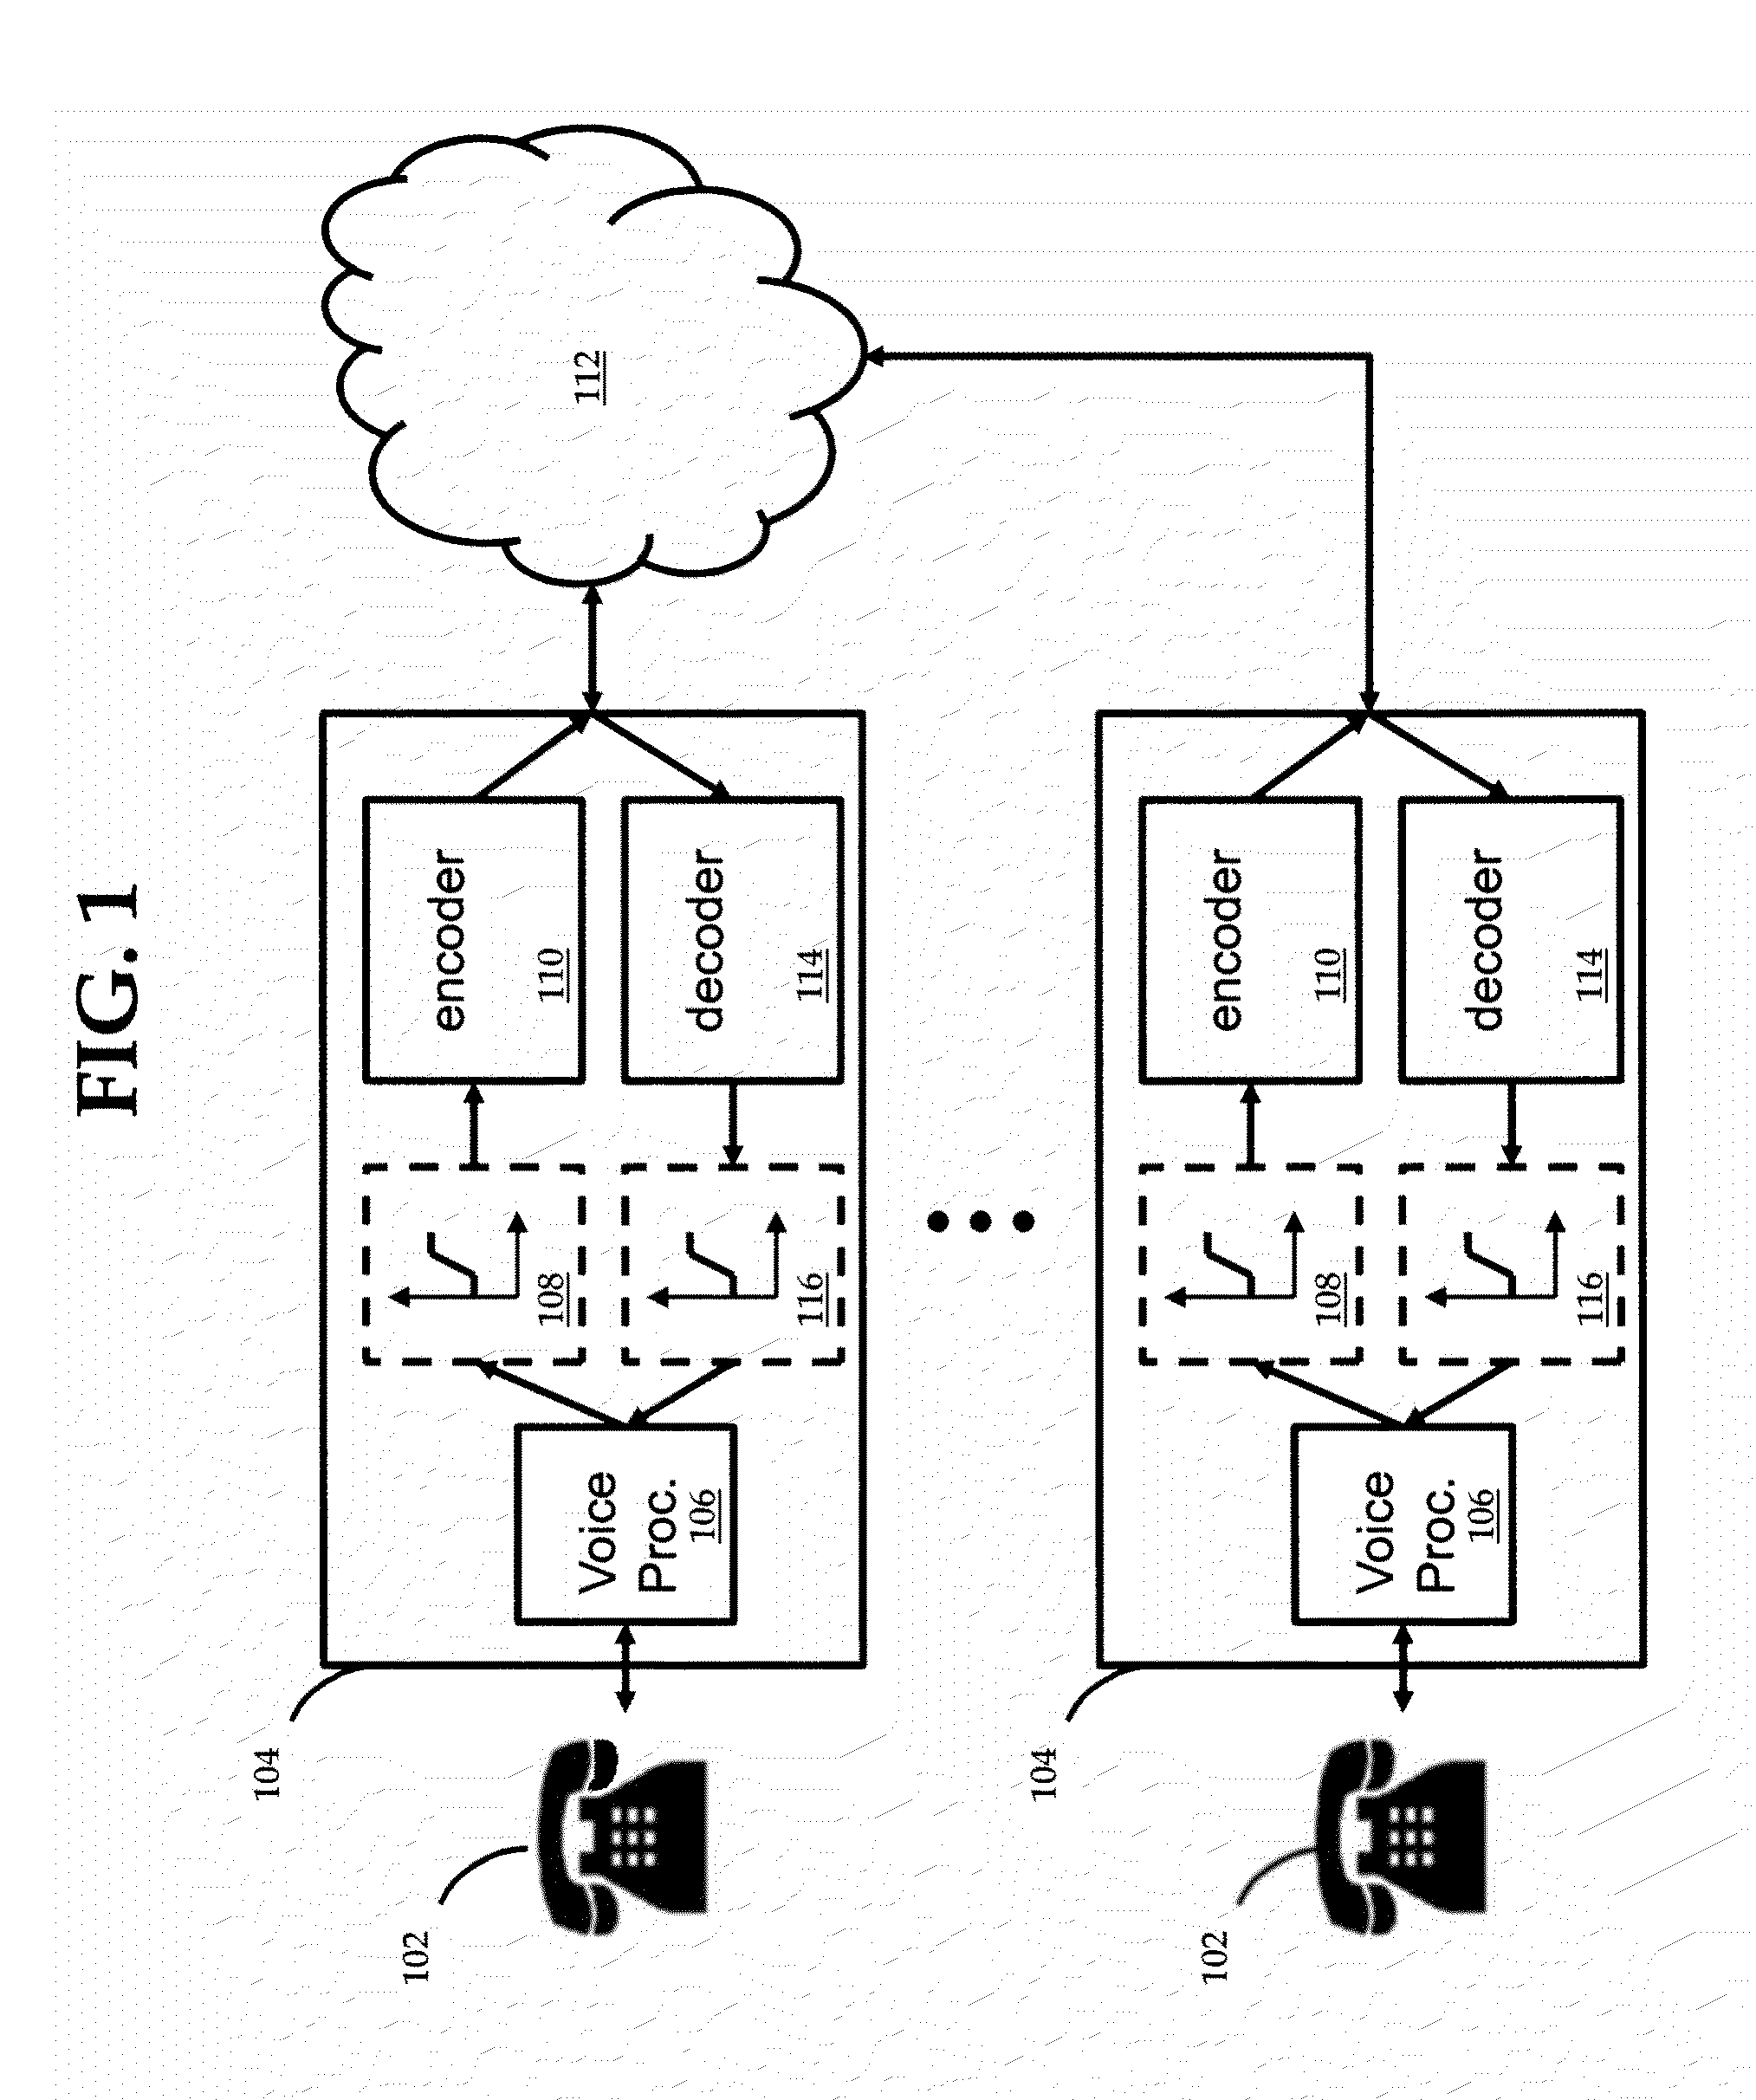 System and method for method for improving speech intelligibility of voice calls using common speech codecs